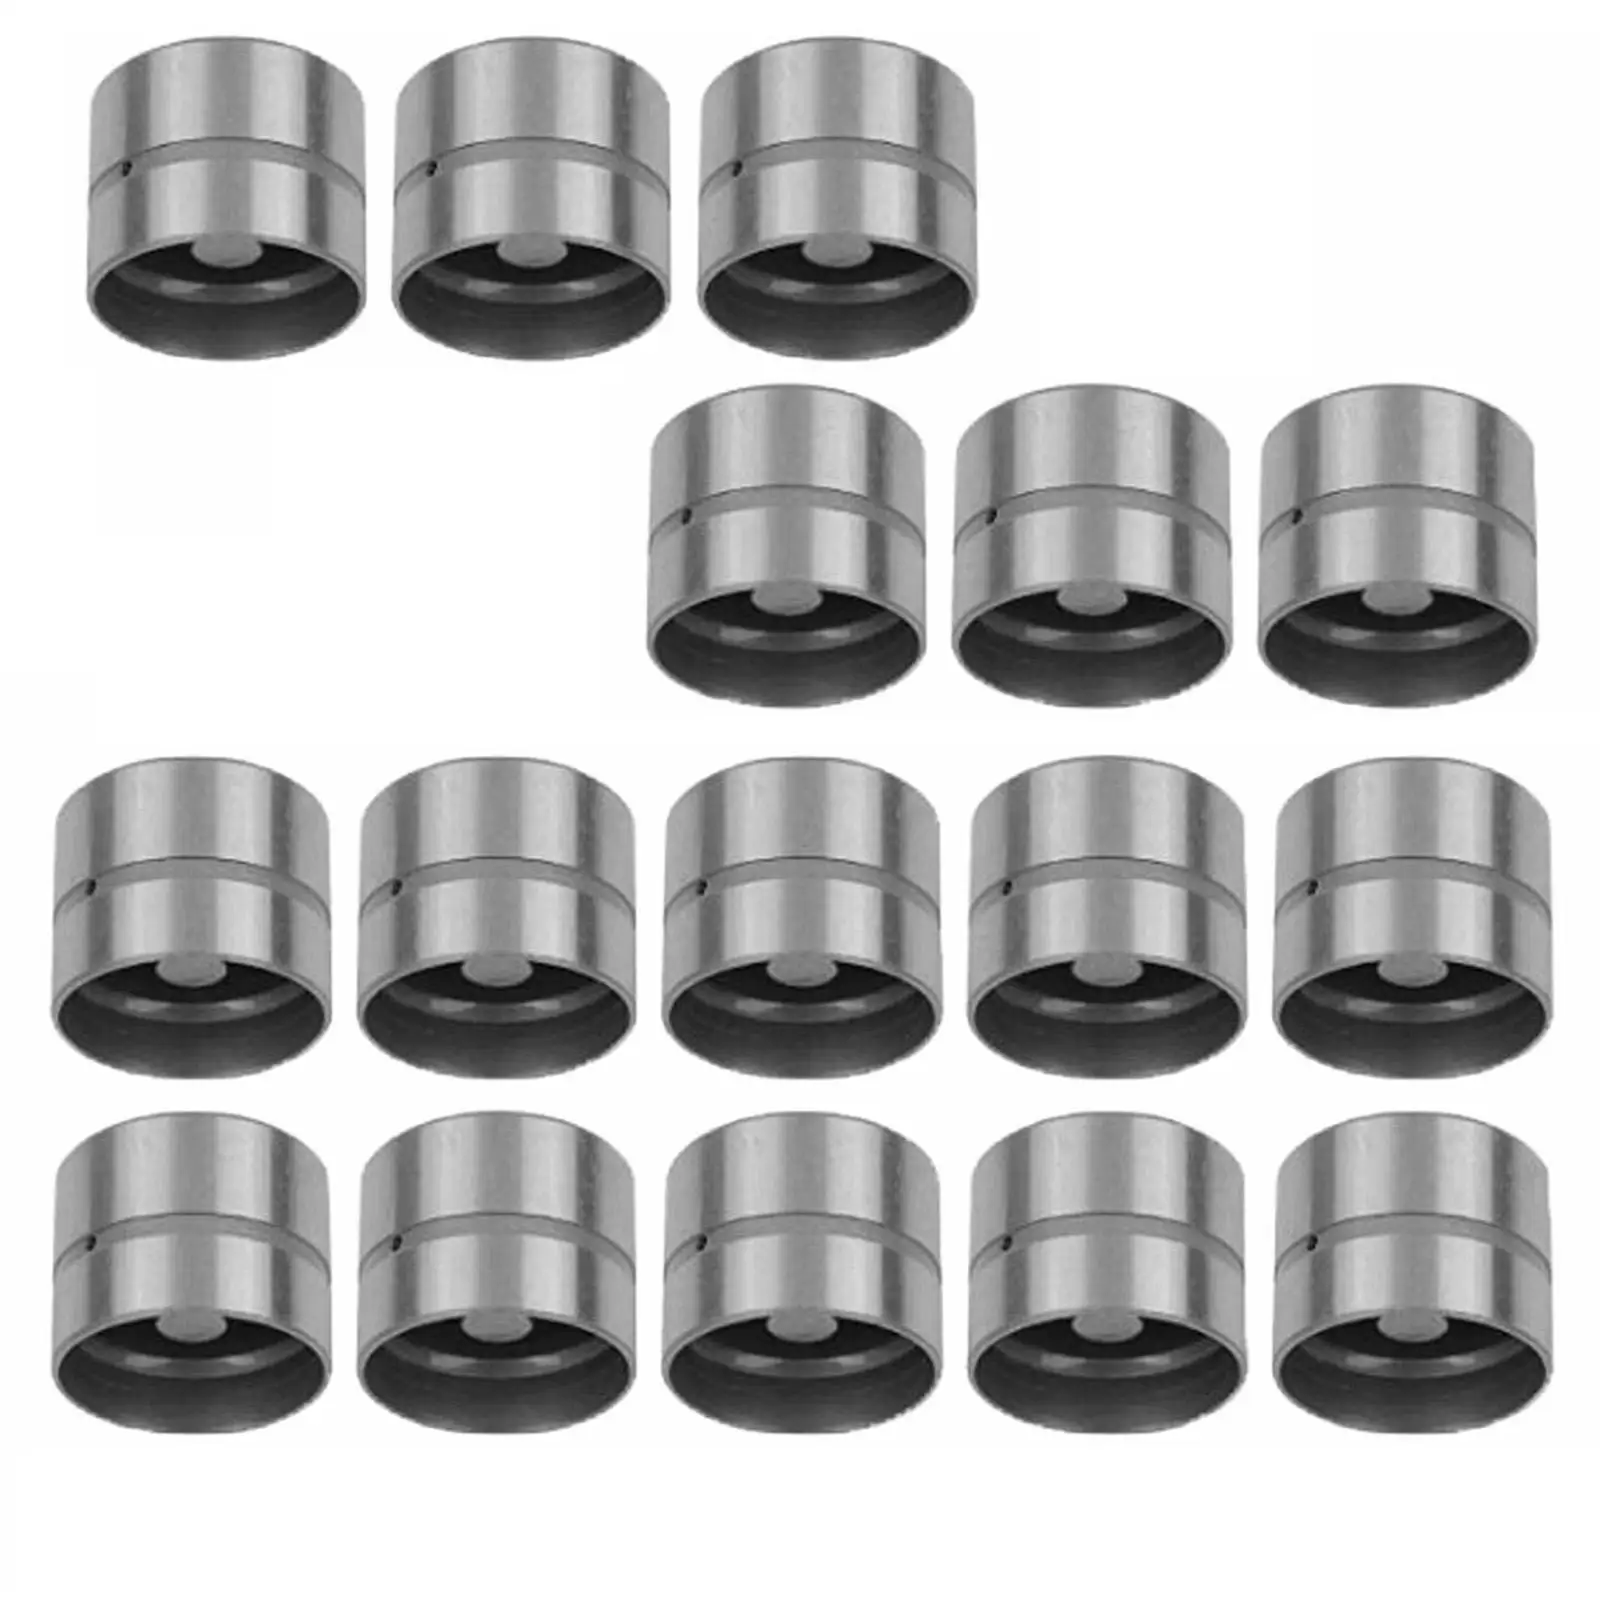 16 Pieces Hydraulic Lifters Tappets for 20XE C20XE 420011810 85000600